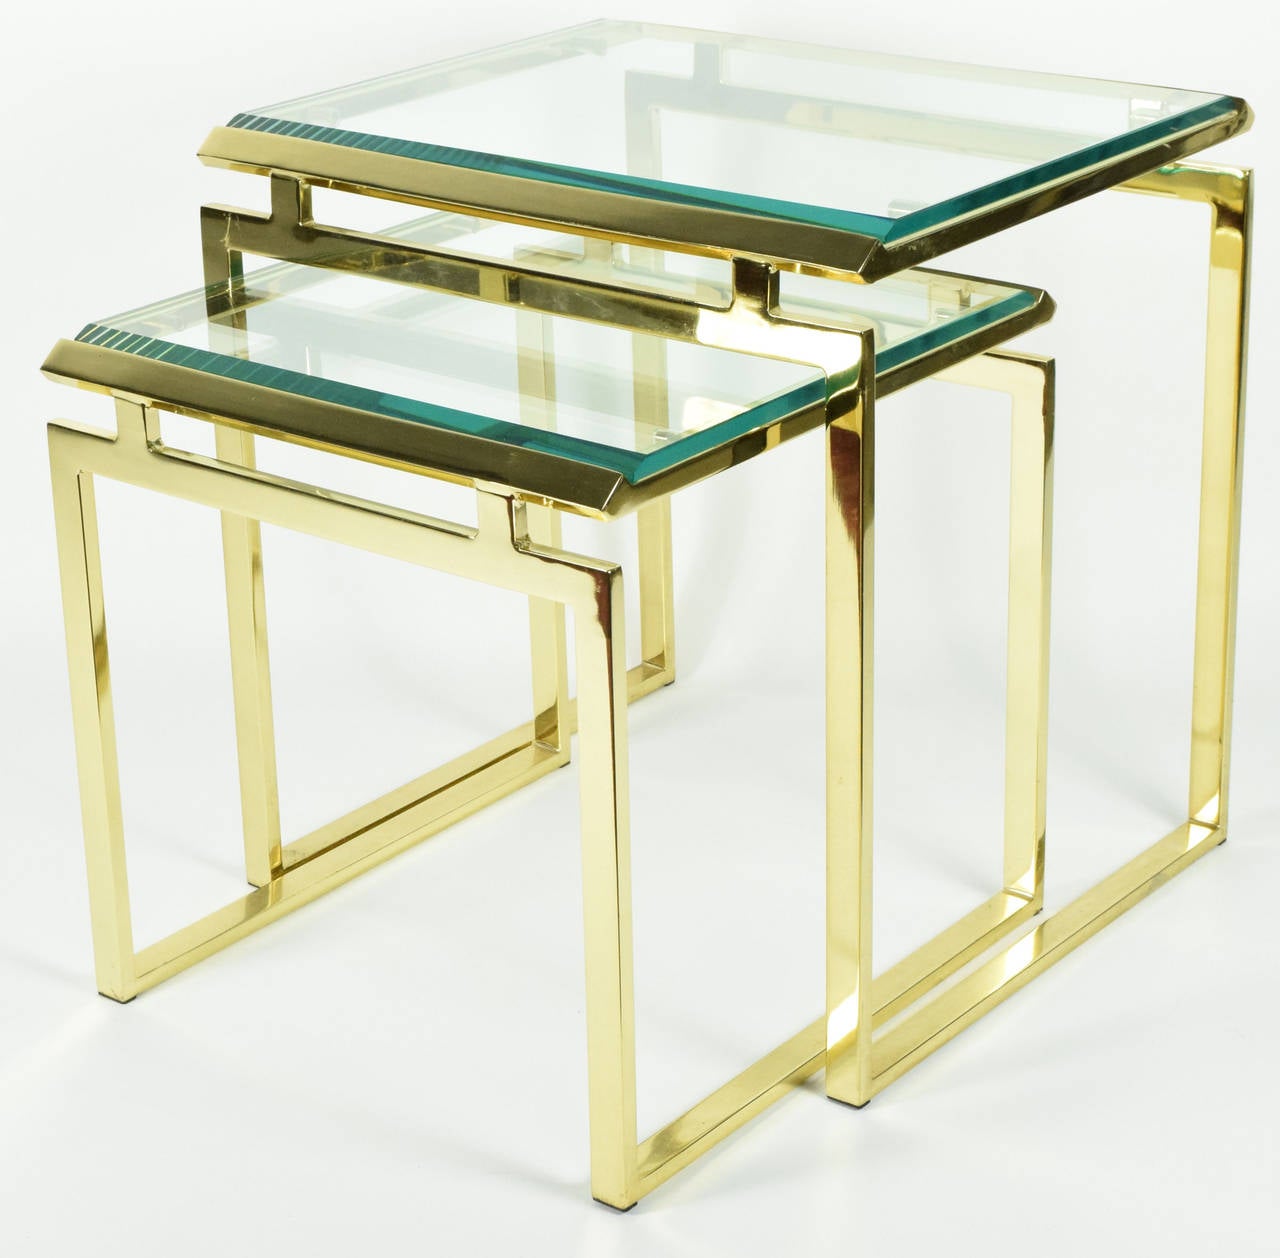 A very nice pair of elegant and simple brass finish nesting tables with beveled glass tops.  Mastercraft style. 